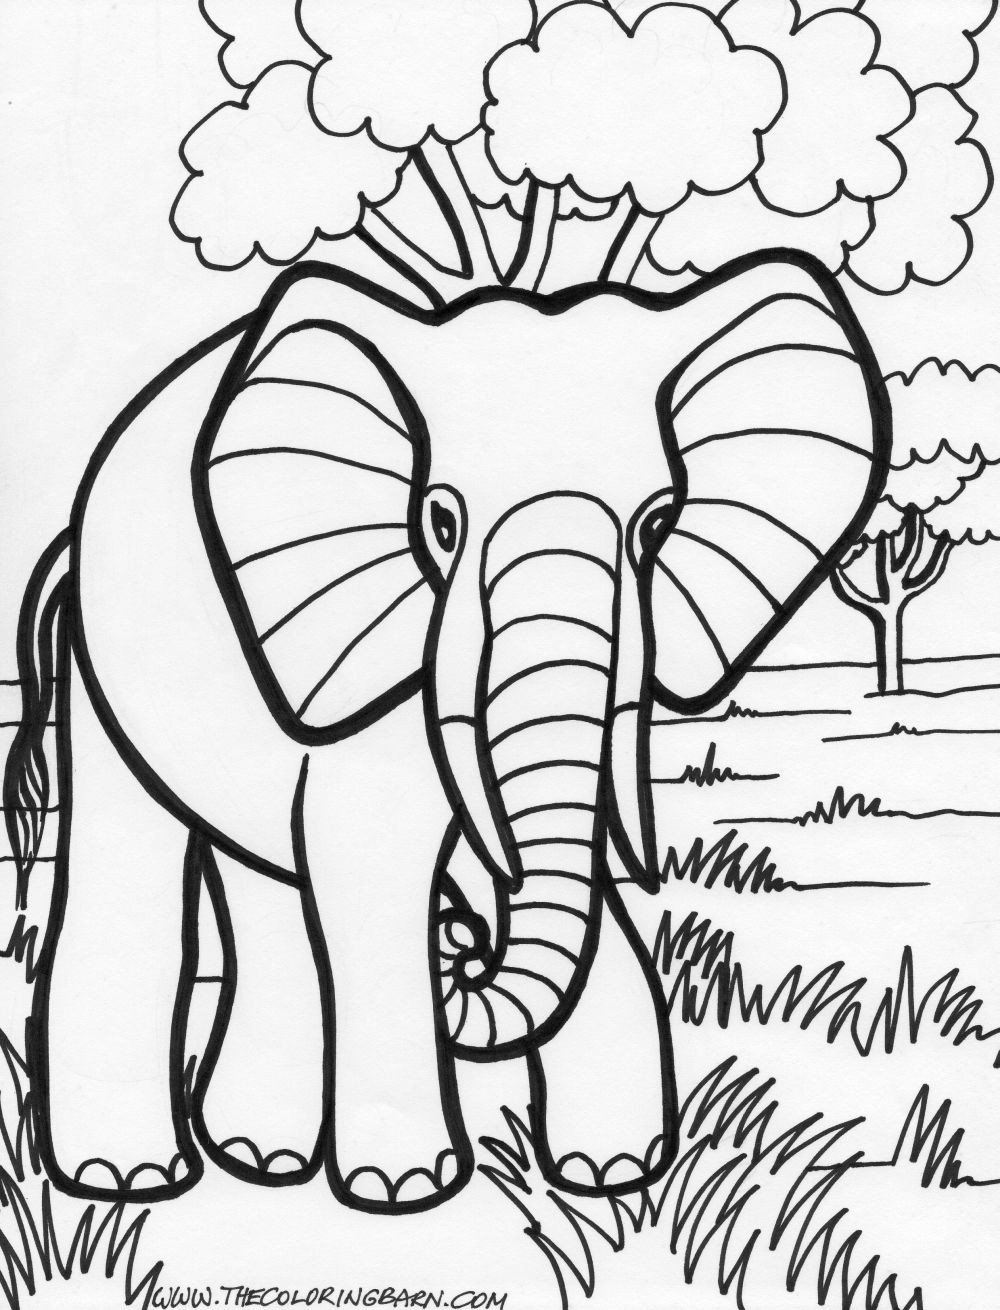 Coloring Pages Of Elephants
 Black beauty 18 Elephant coloring pages